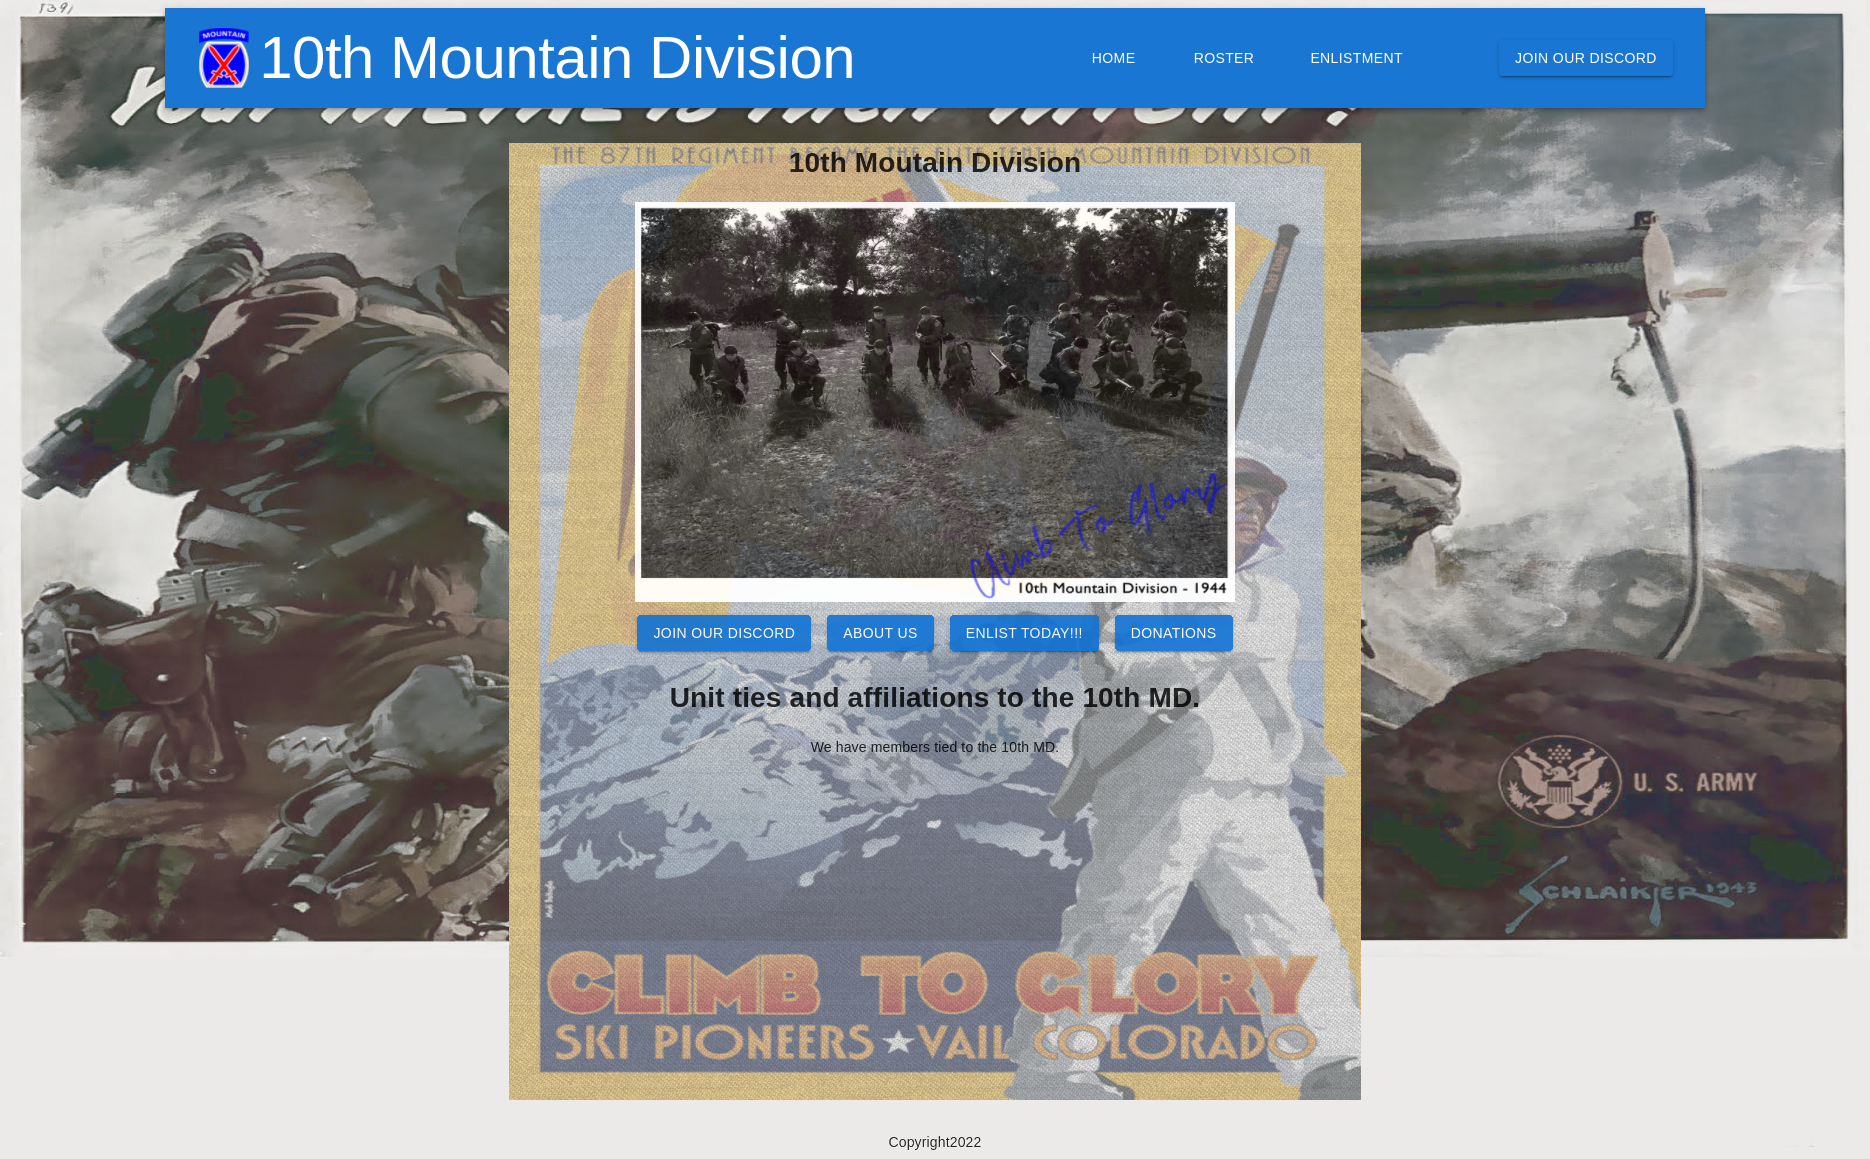 The 10th Mountain Division Gaming Community